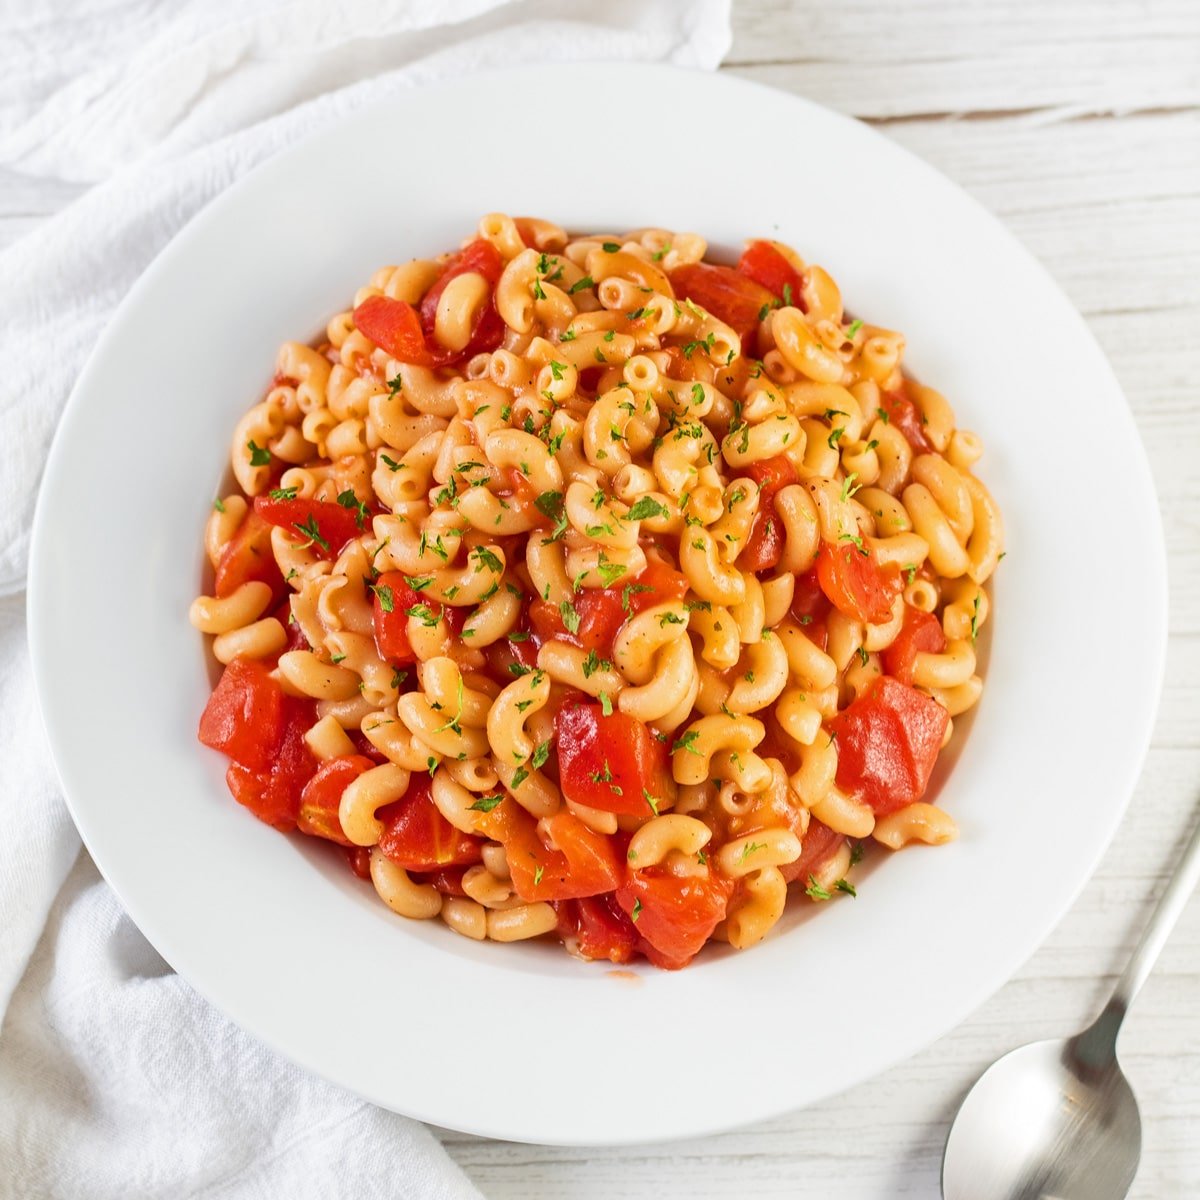 Tasty macaroni and tomatoes served in white pasta bowl on light background.